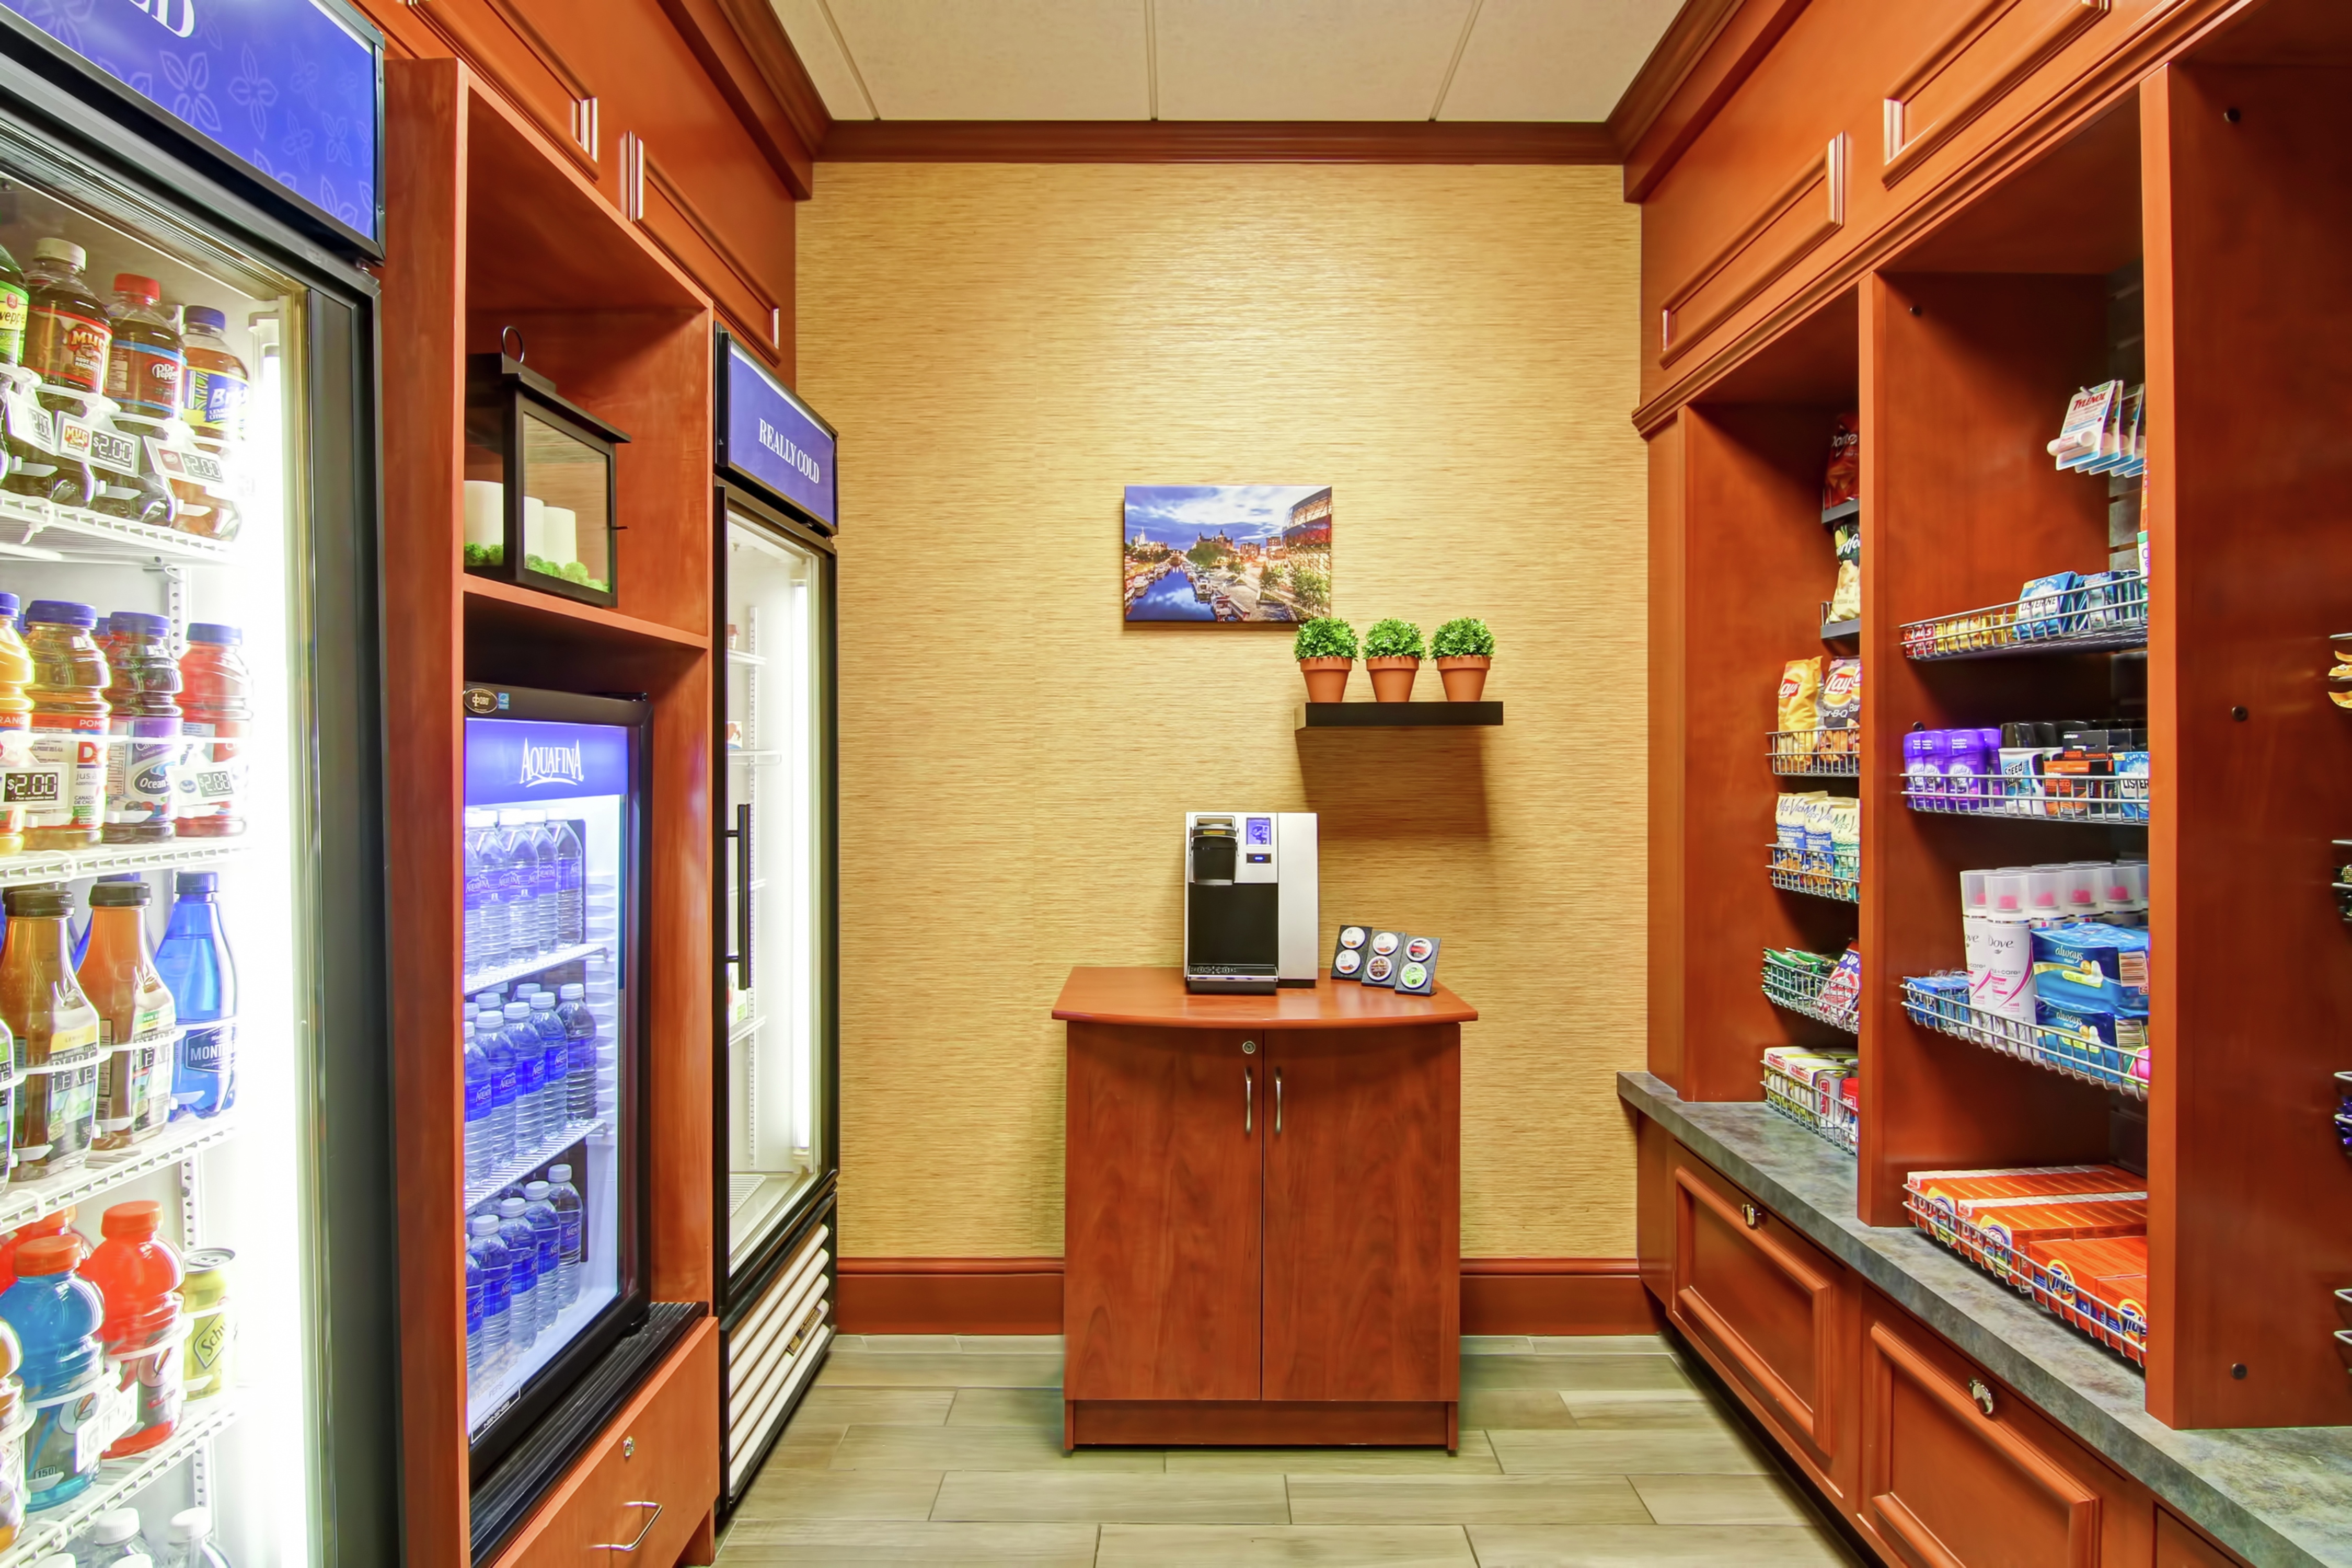 Snacks and Convenience Items Available for Guest Purchase at Pavilion Pantry